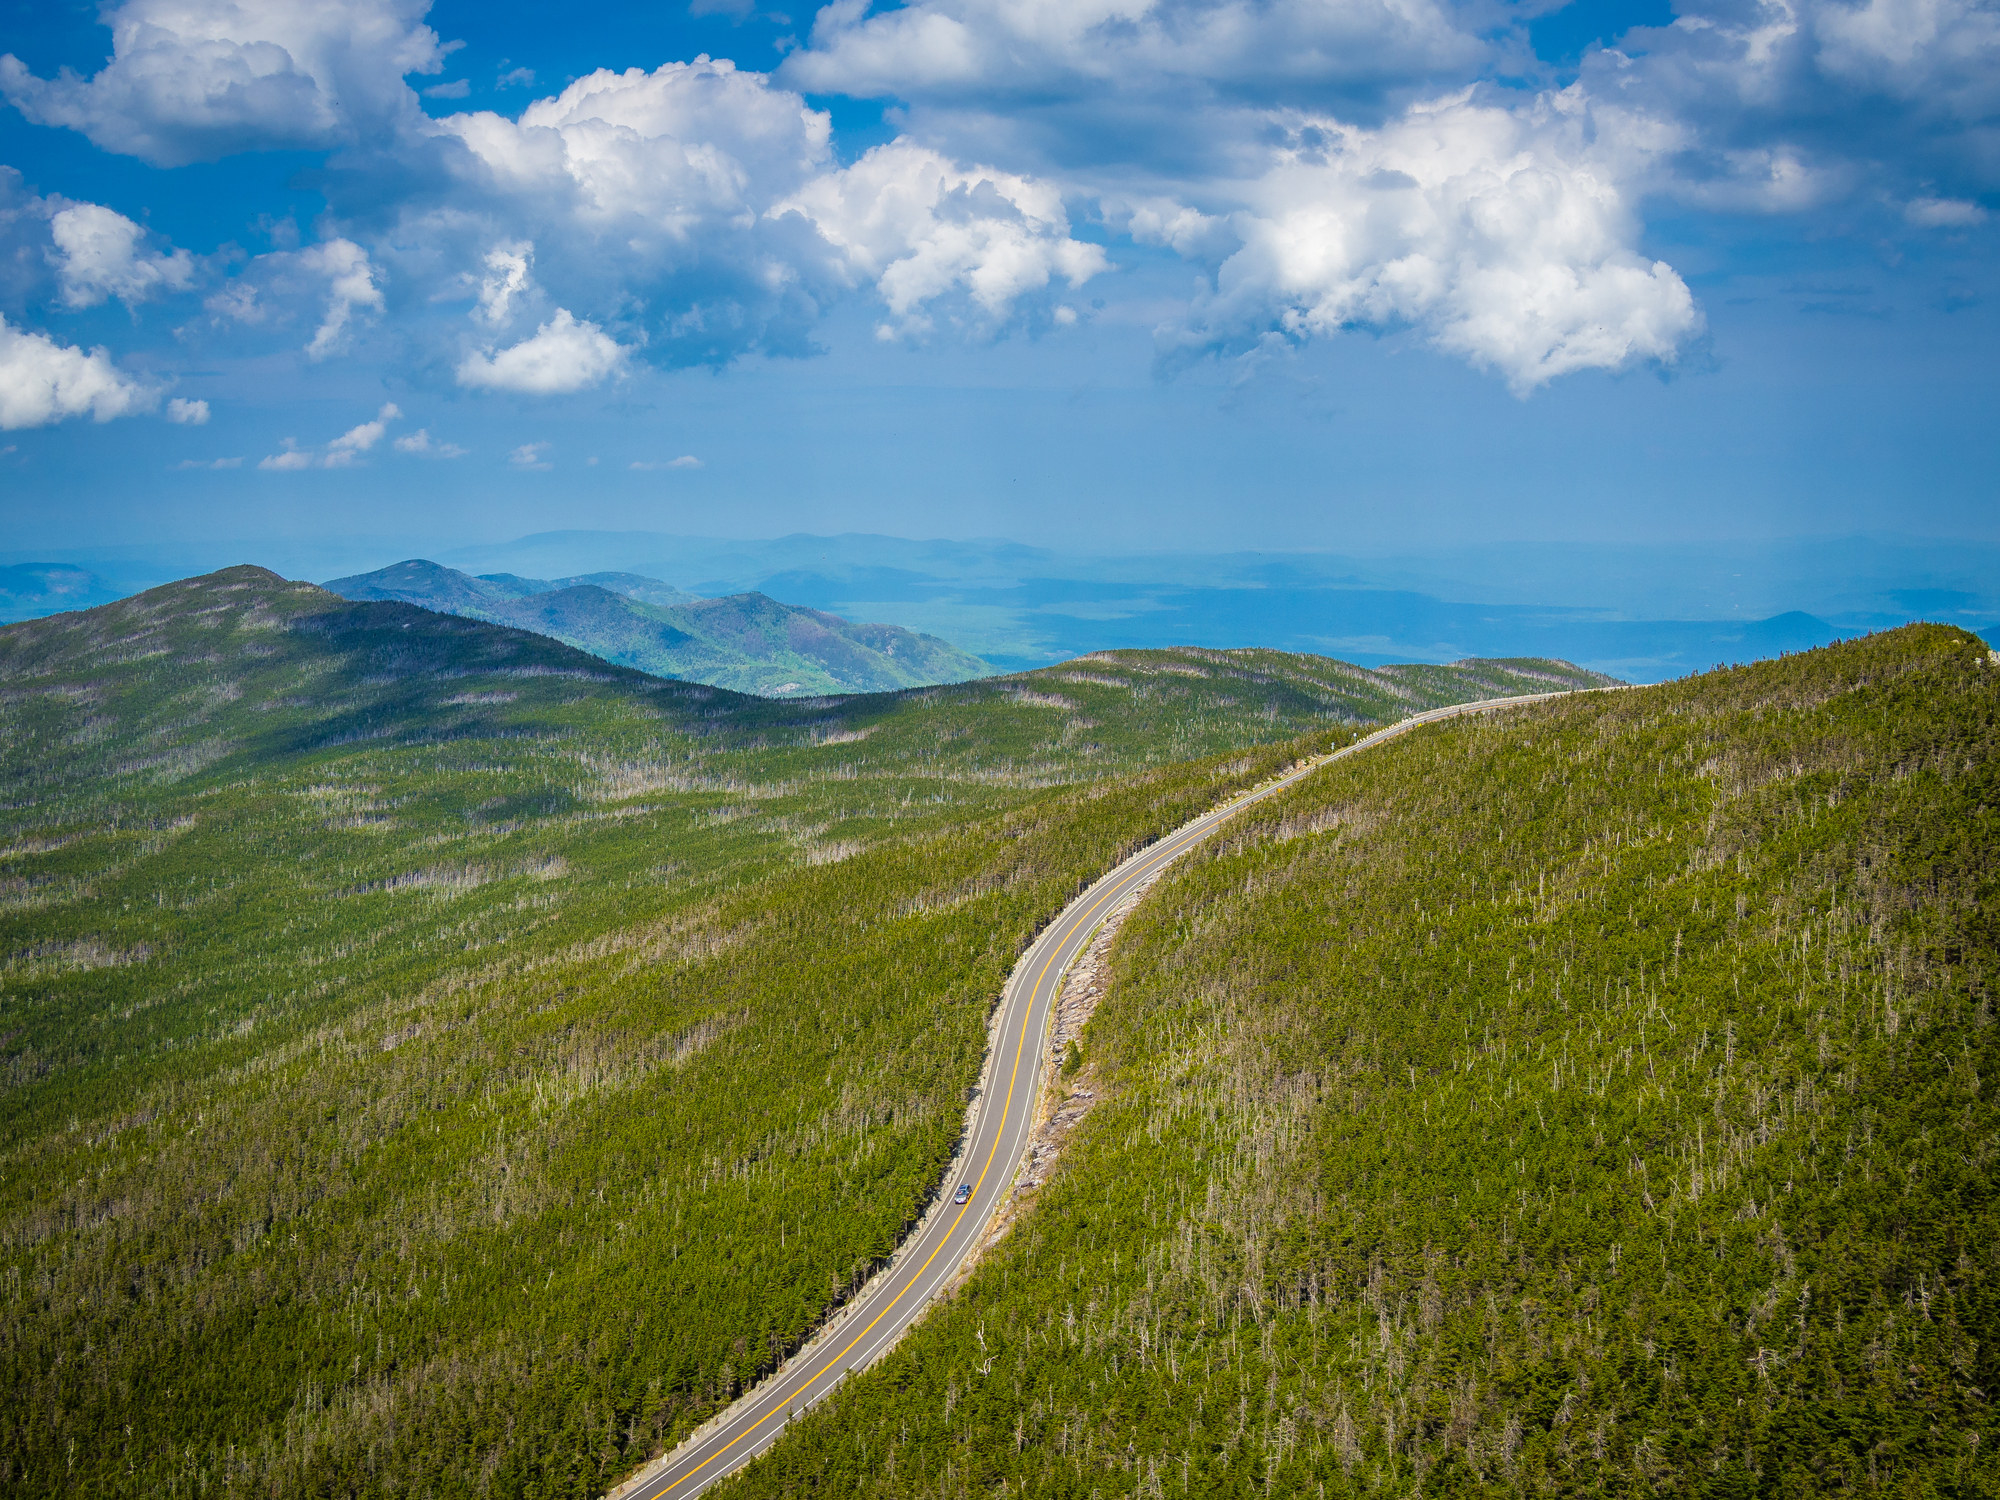 aerial view of road winding through Whiteface mountain, surrounded by greenery in Adirondack, NY, USA